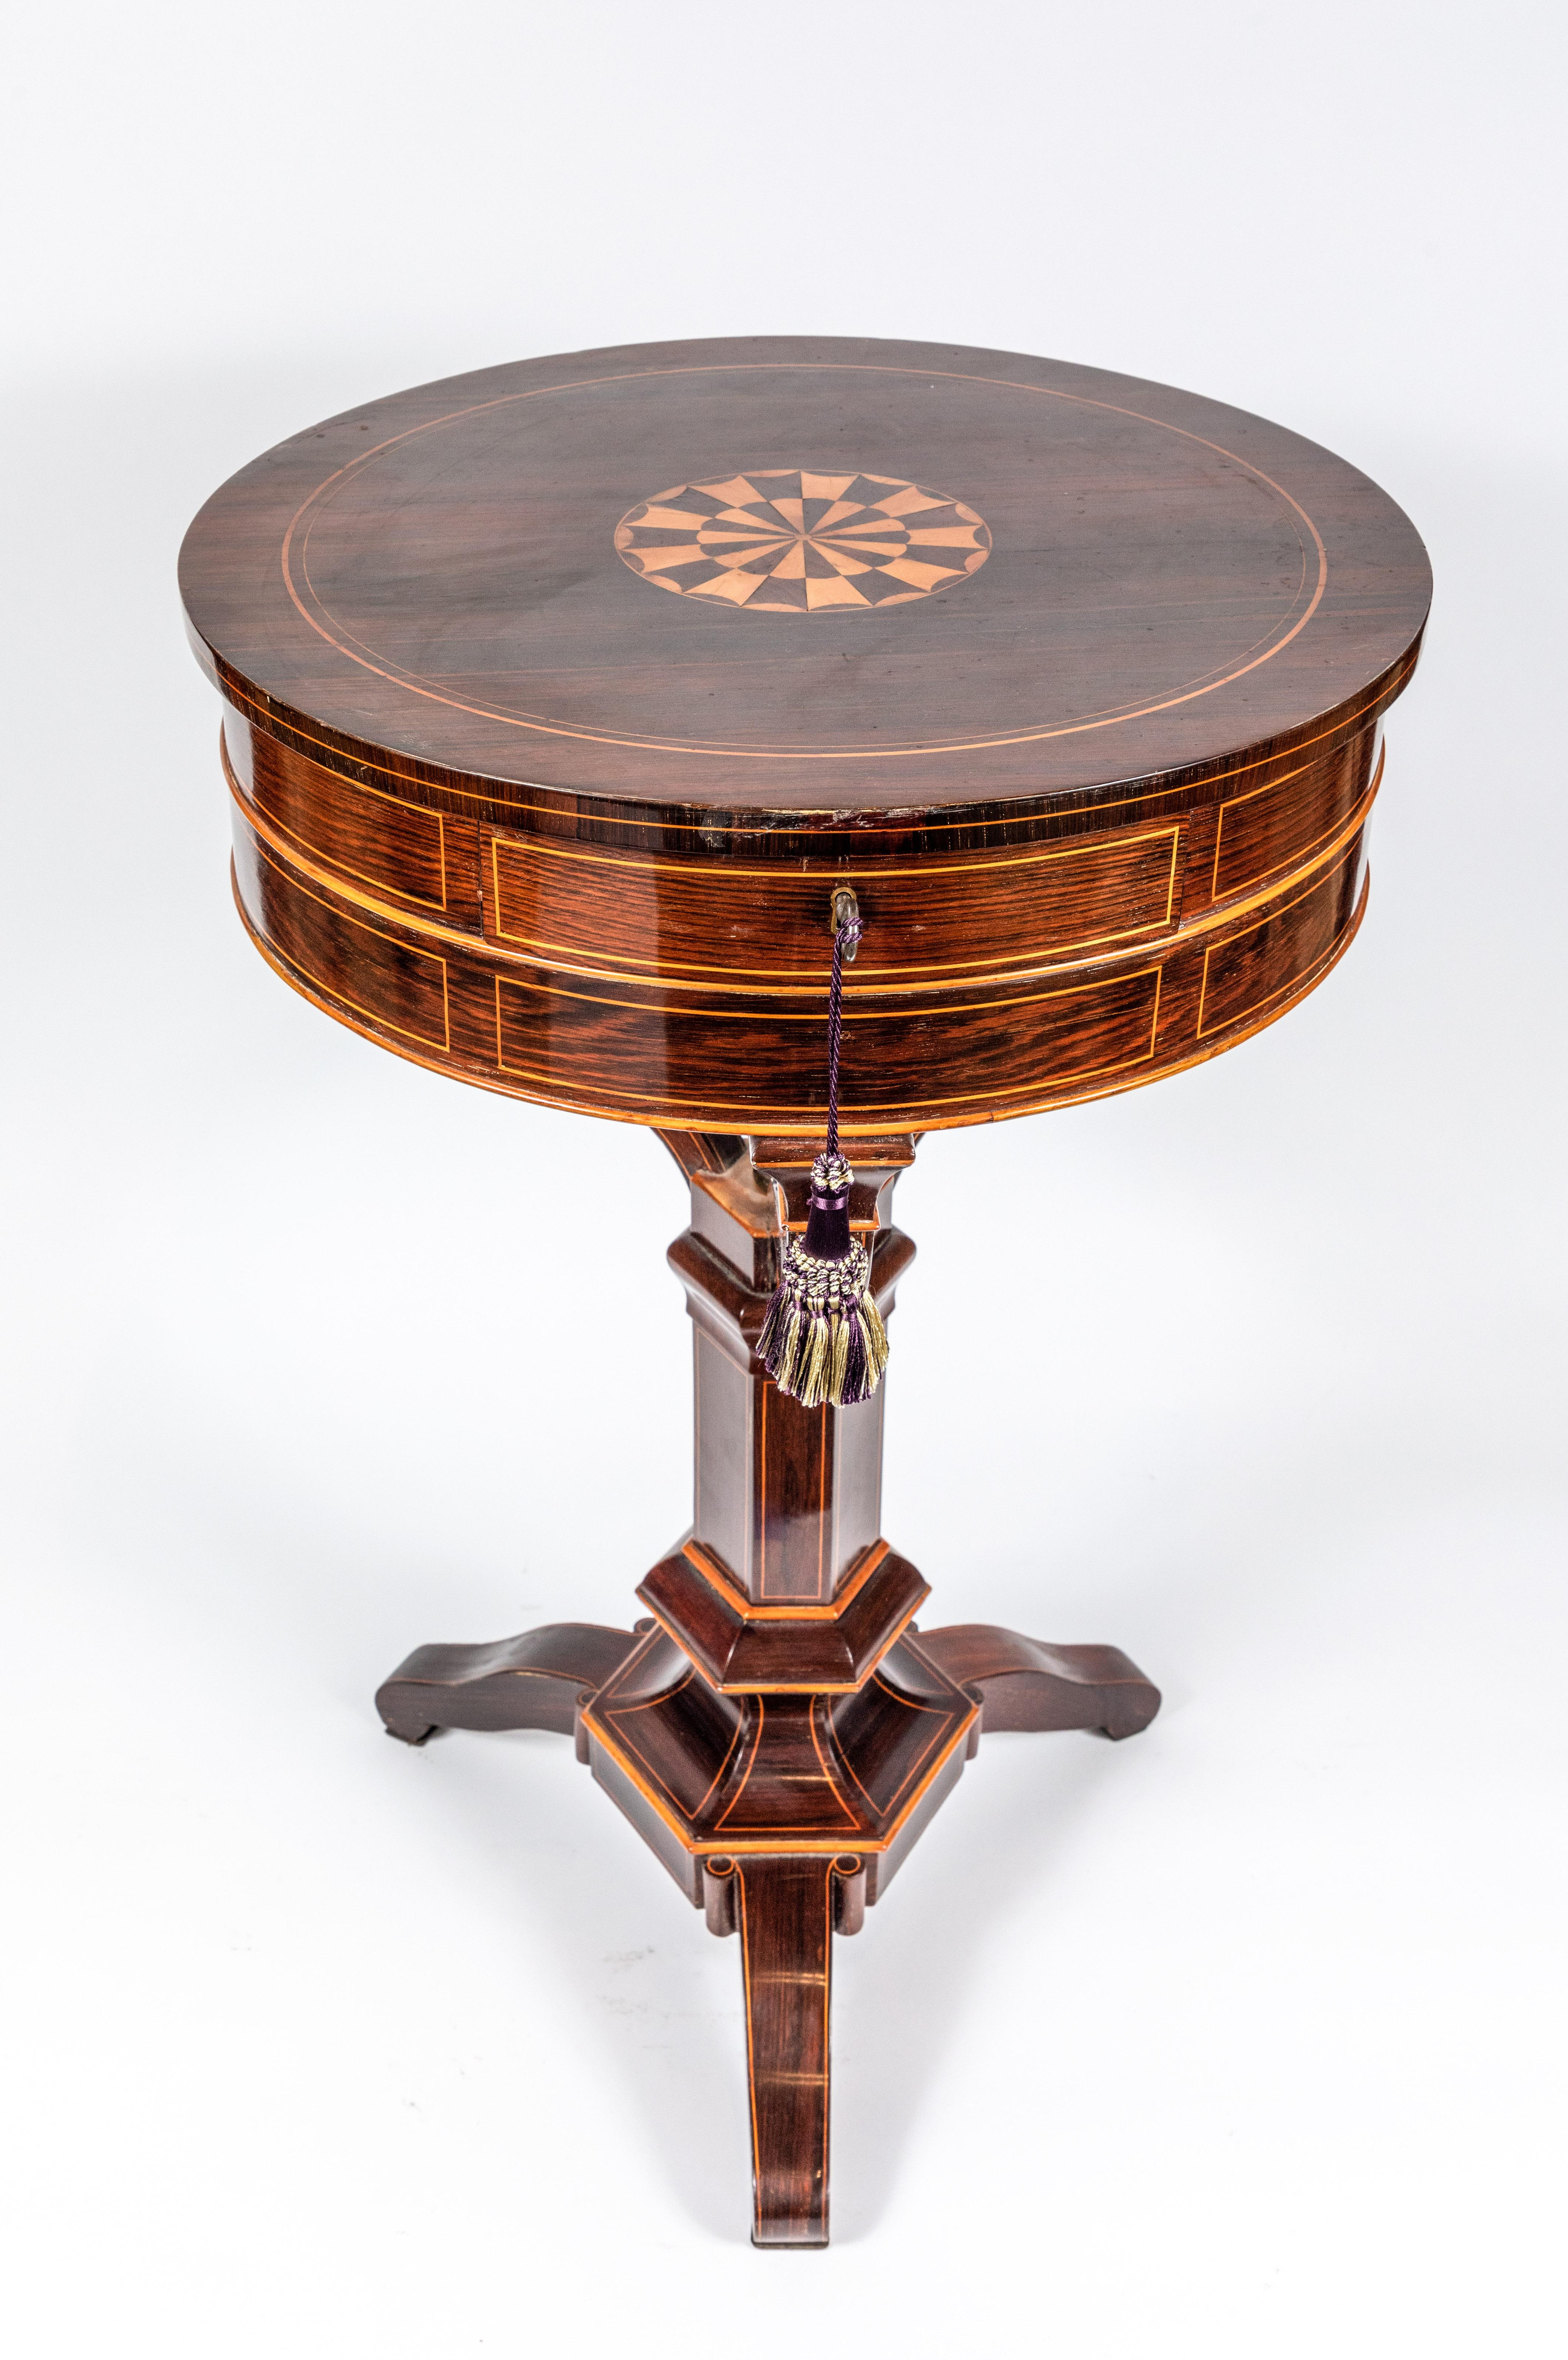 Petite, beautifully veneered and inlaid, circular, two-drawer Biedermeier-style pedestal side table on a tripod foot.